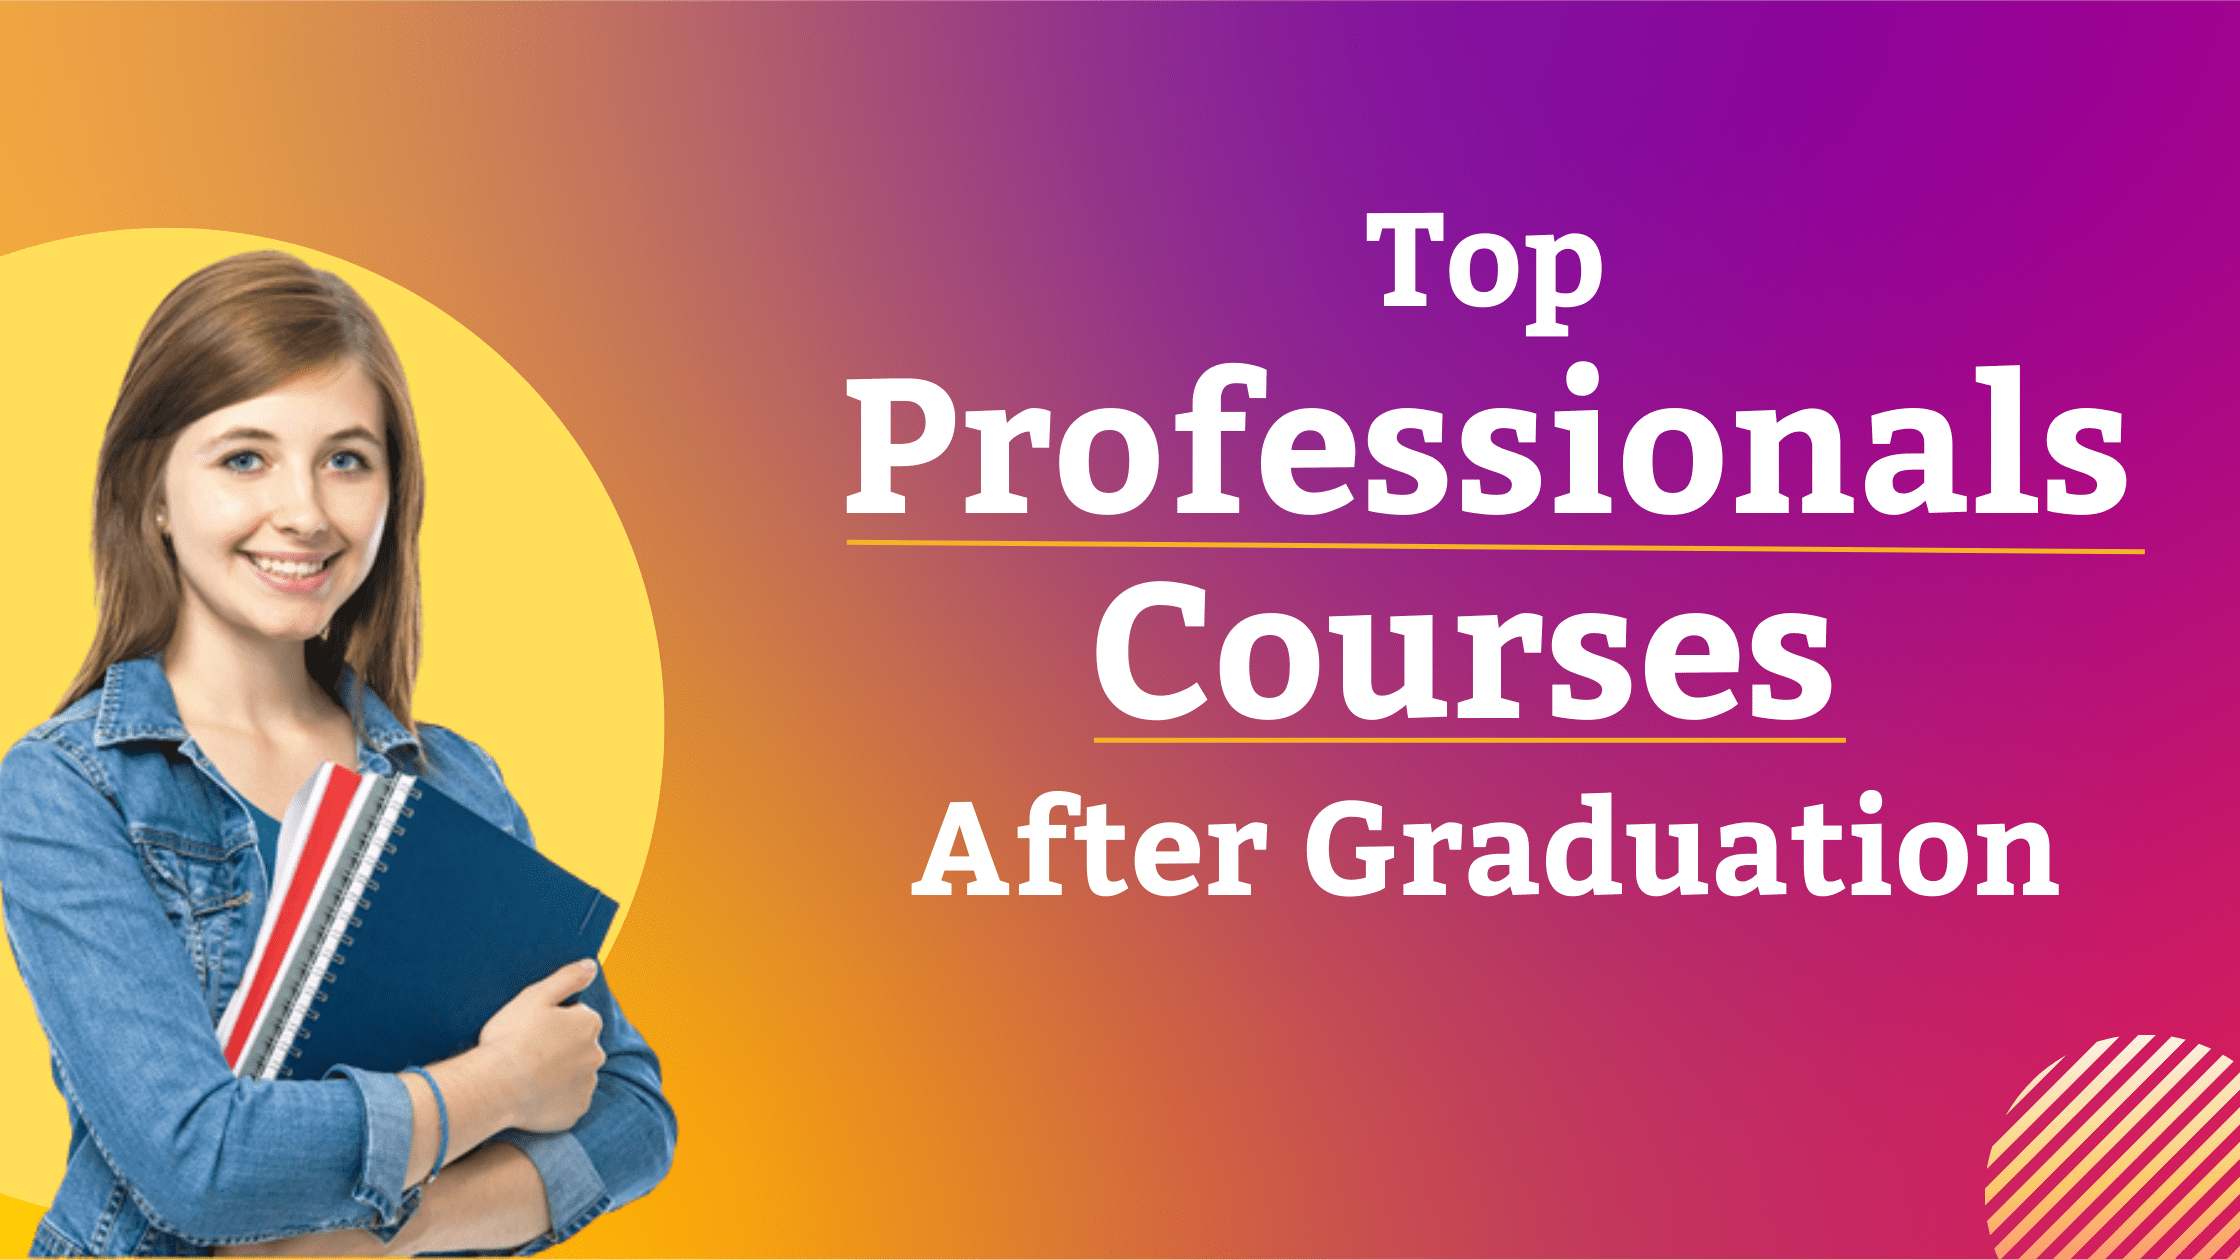 Photo of Top Professionals Courses After Graduation